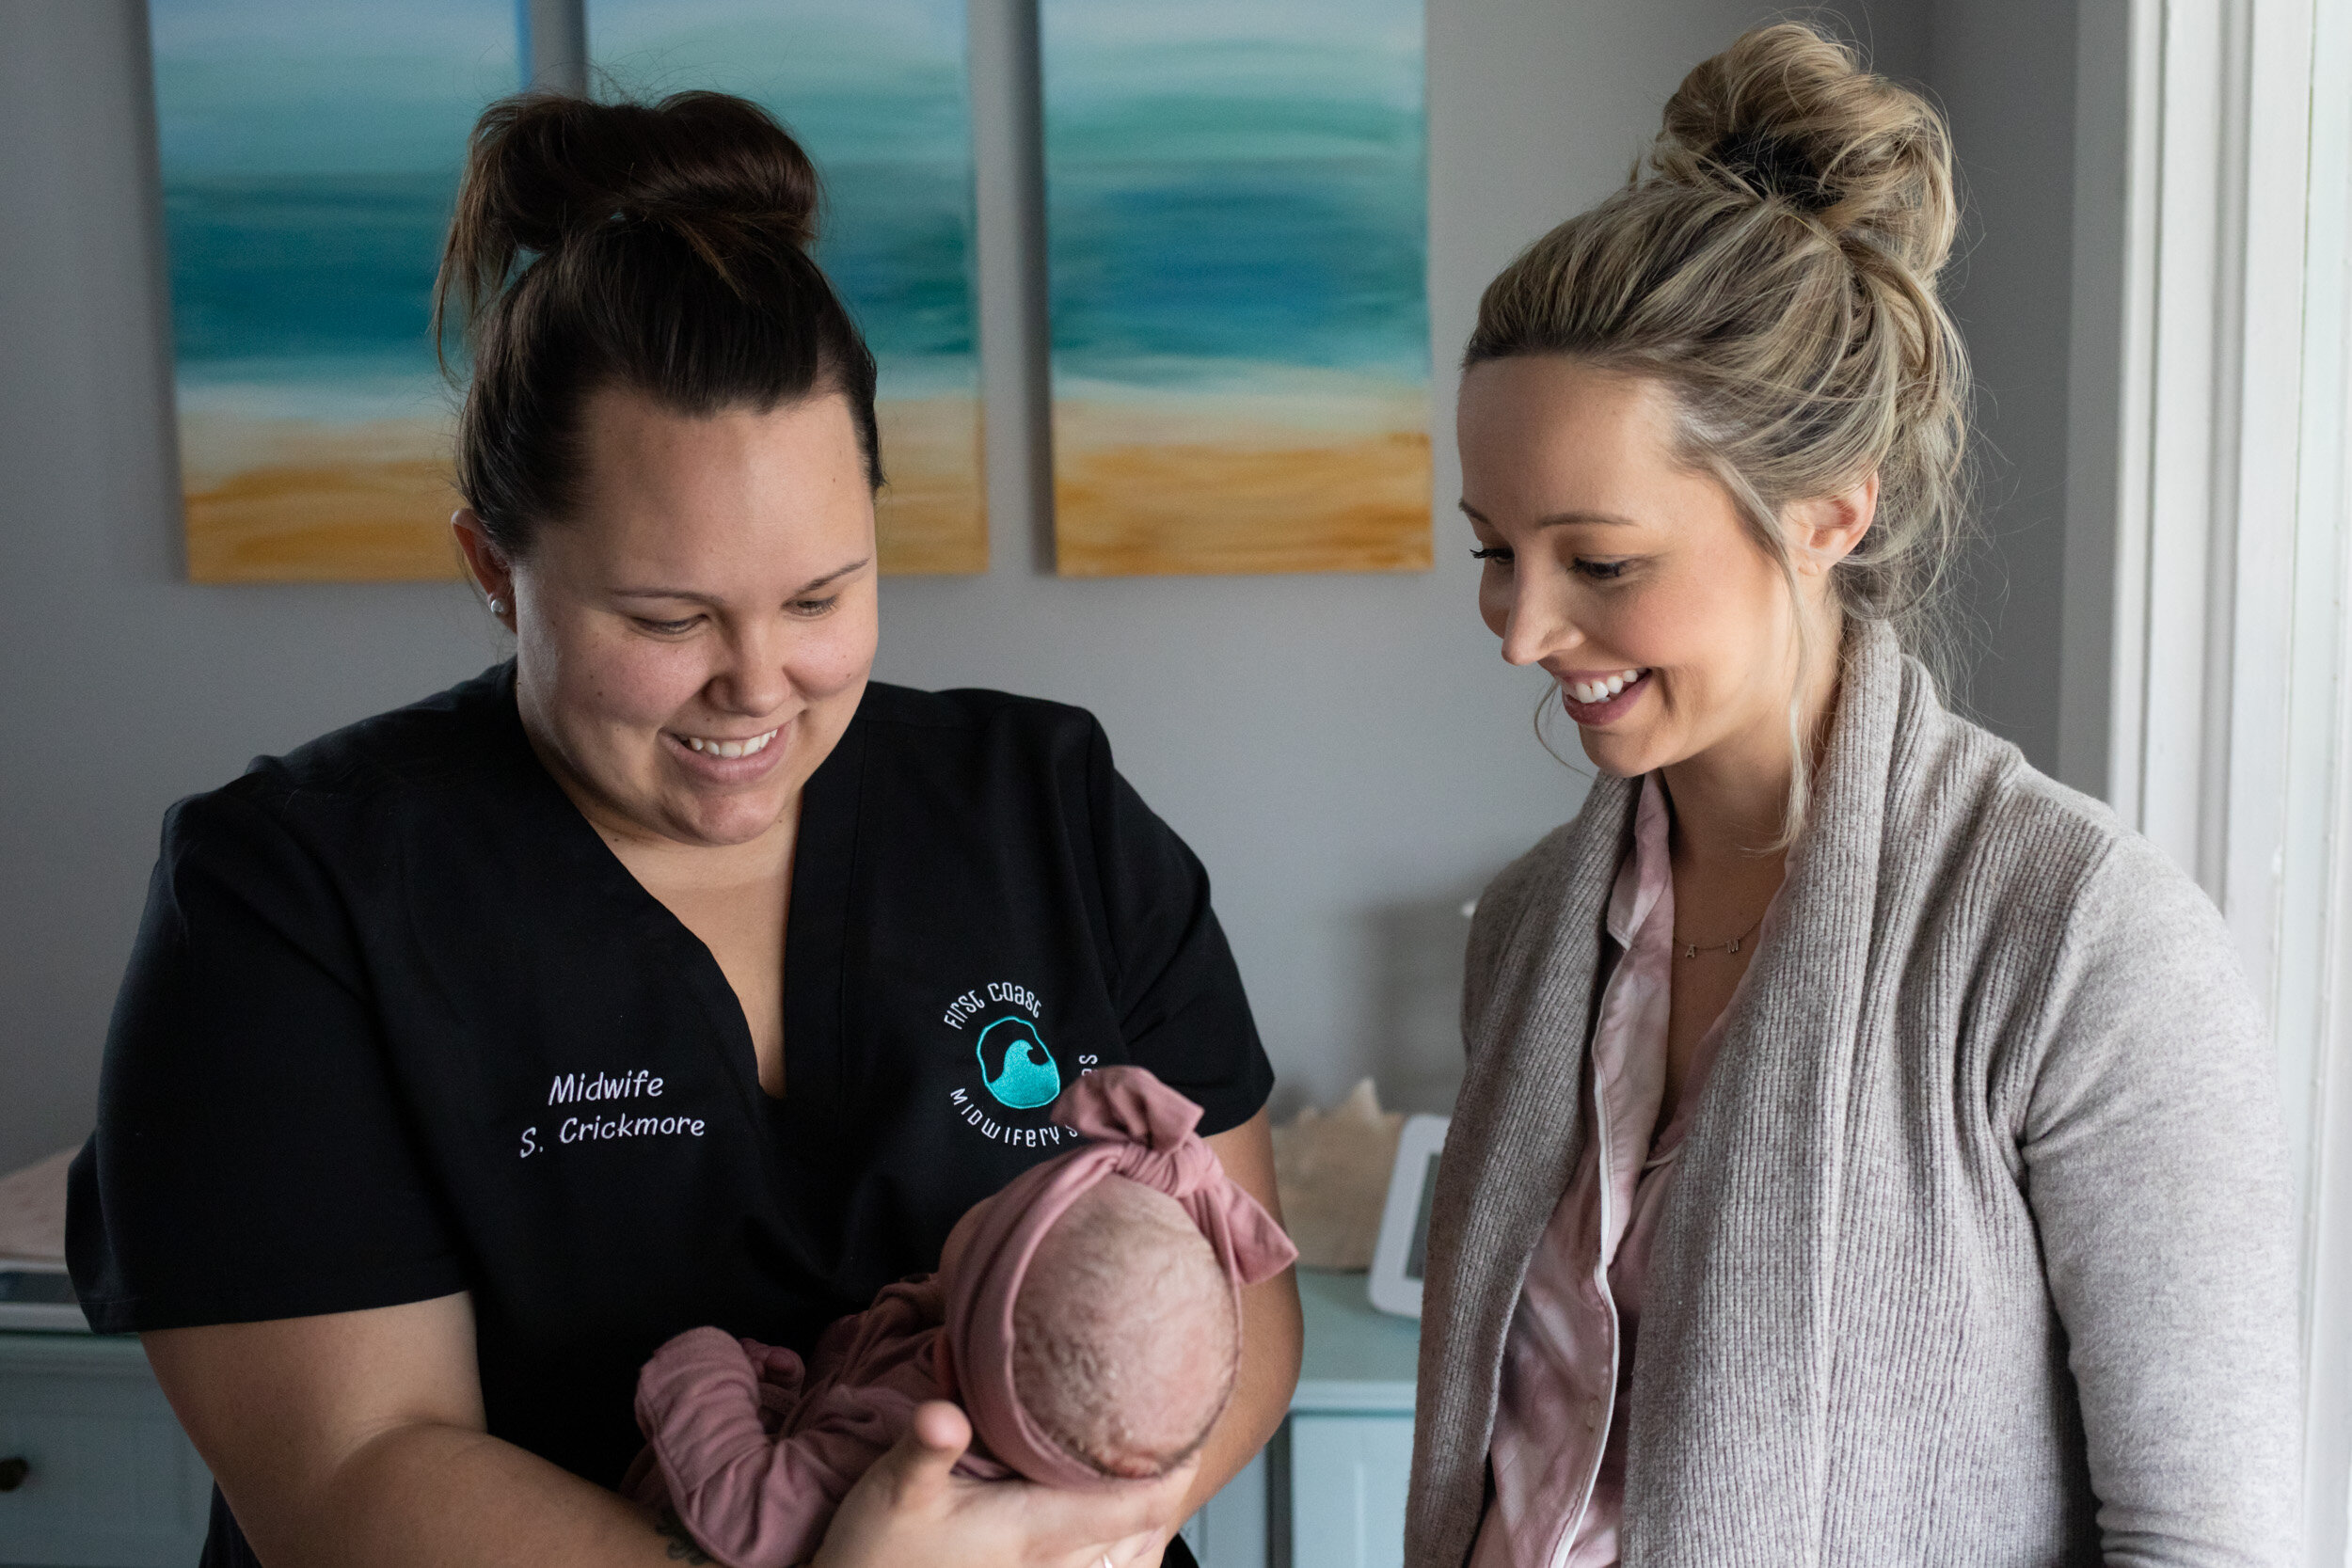 Midwife Sam and new mom smiling at baby girl just after birth